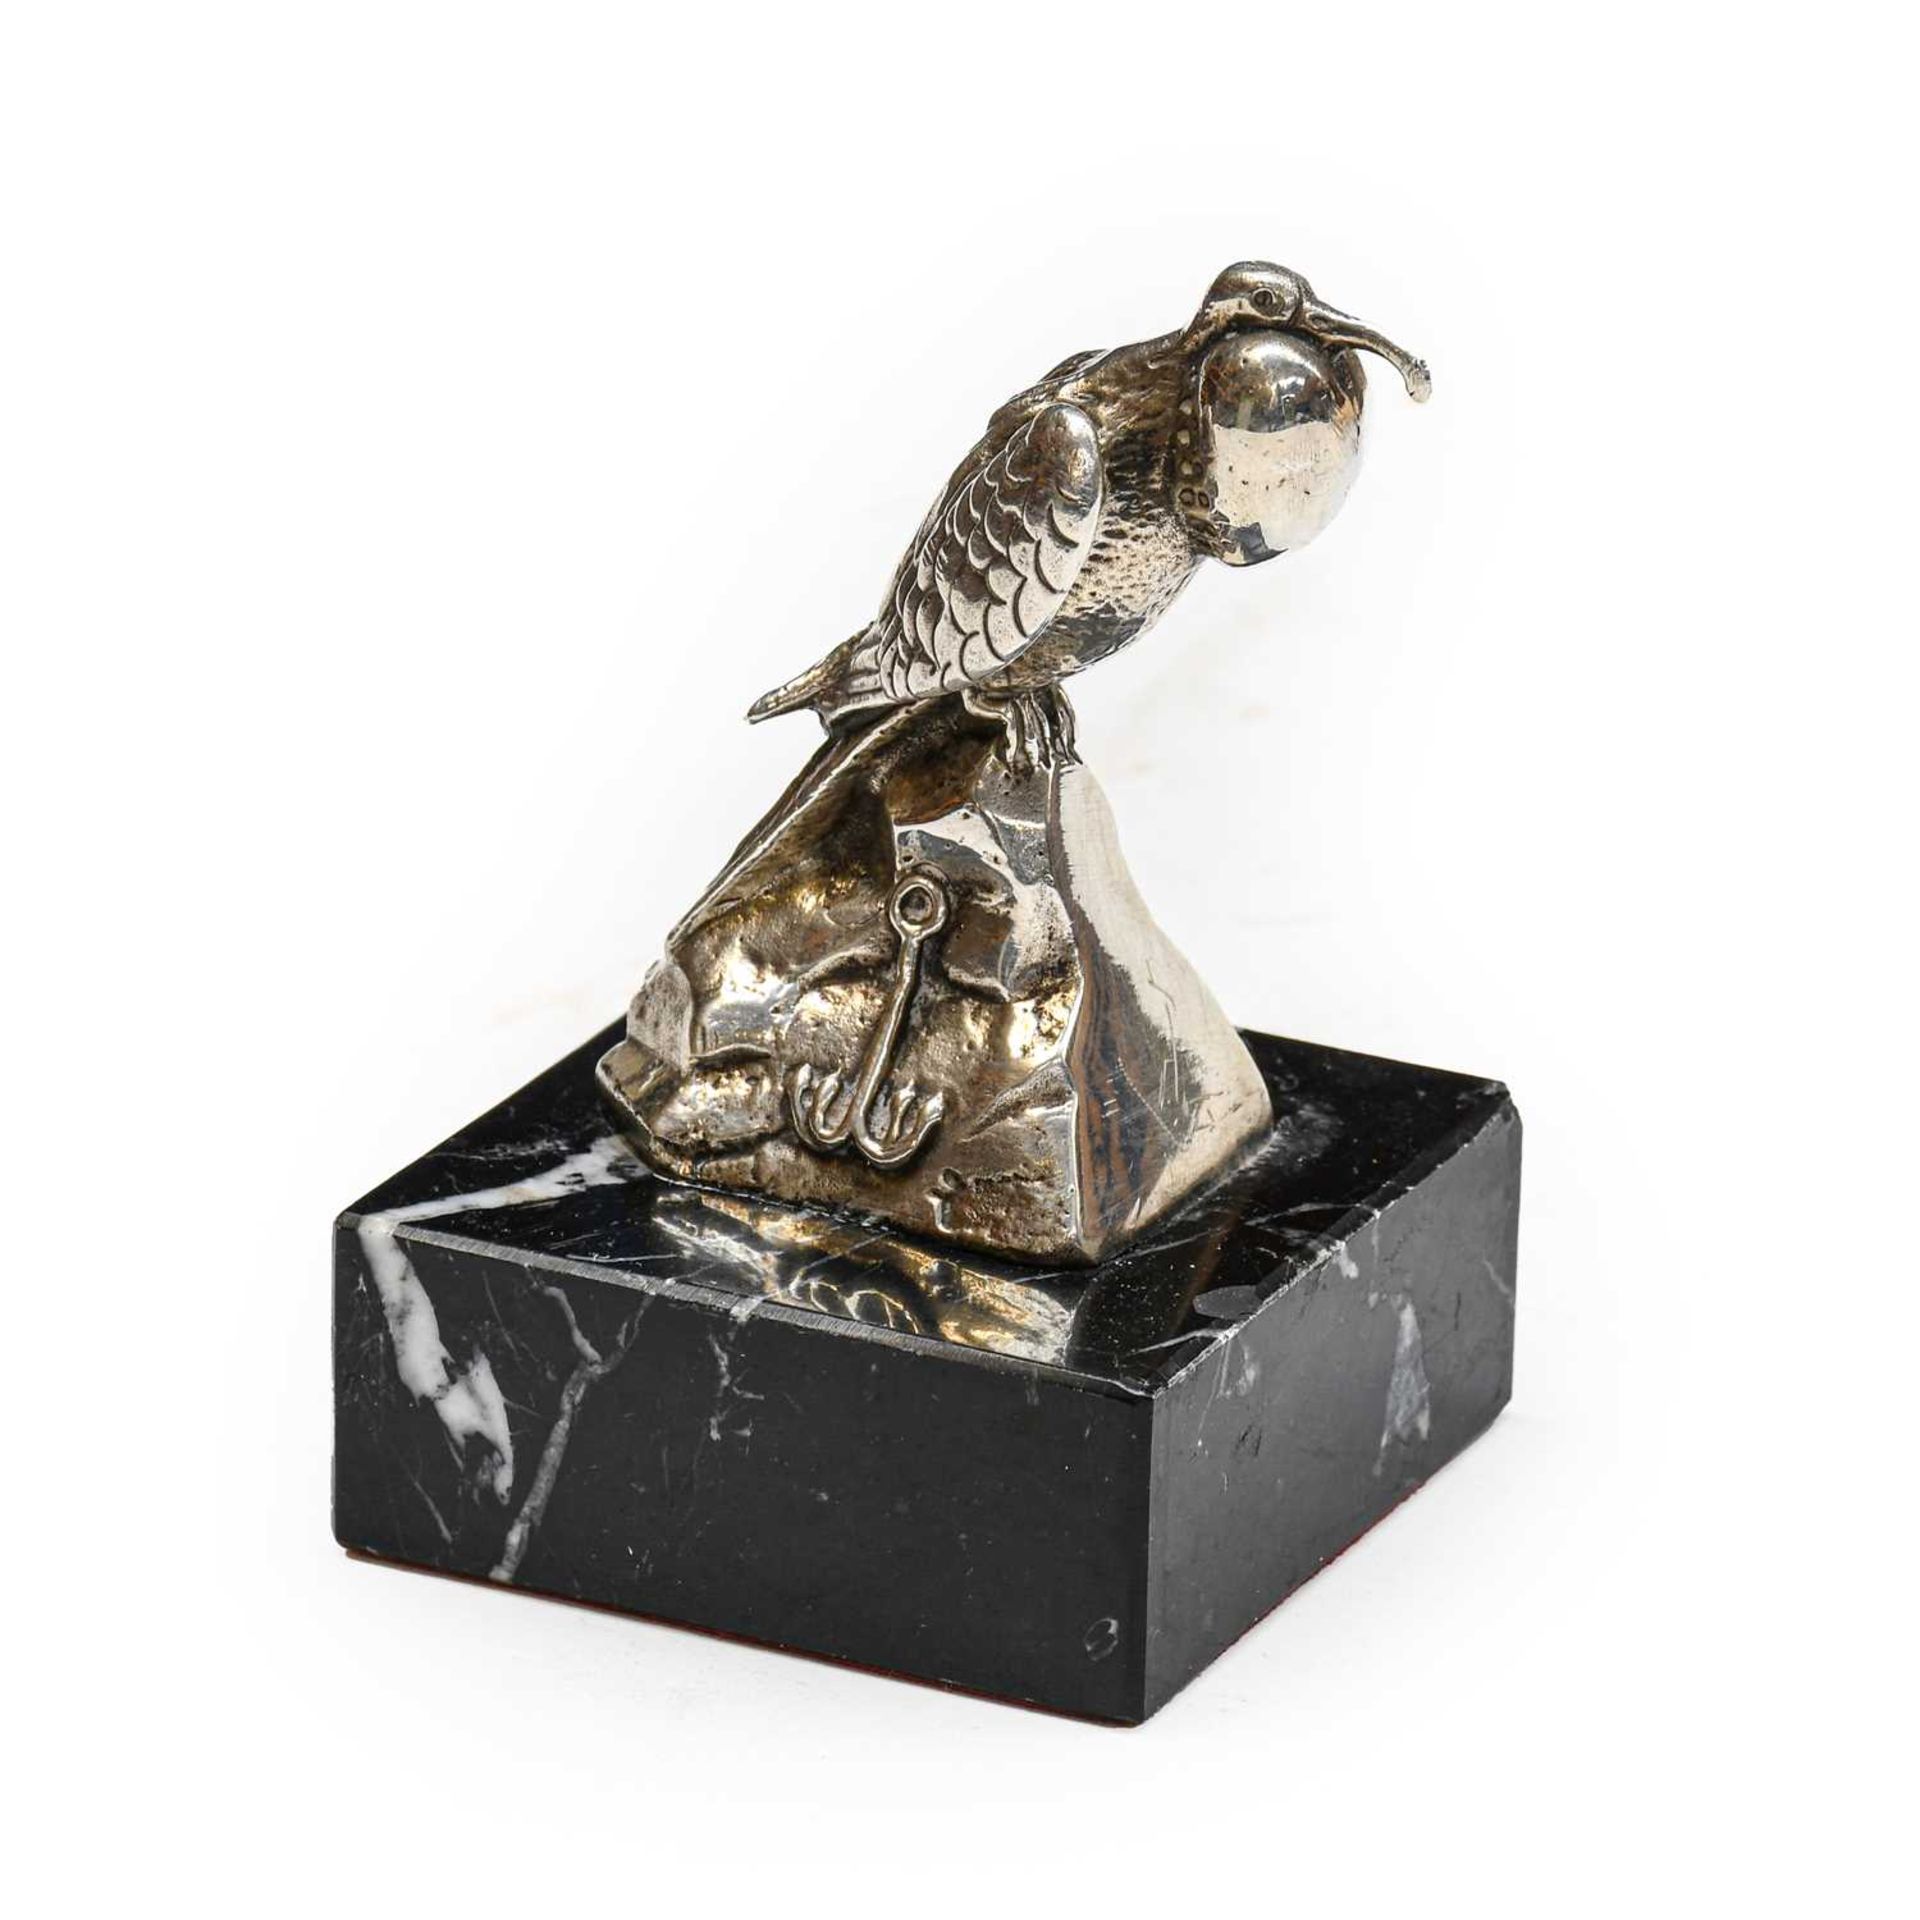 A Chrome-Plated Bird of Prey Car Mascot, standing on a rocky base, mounted on a later black marble